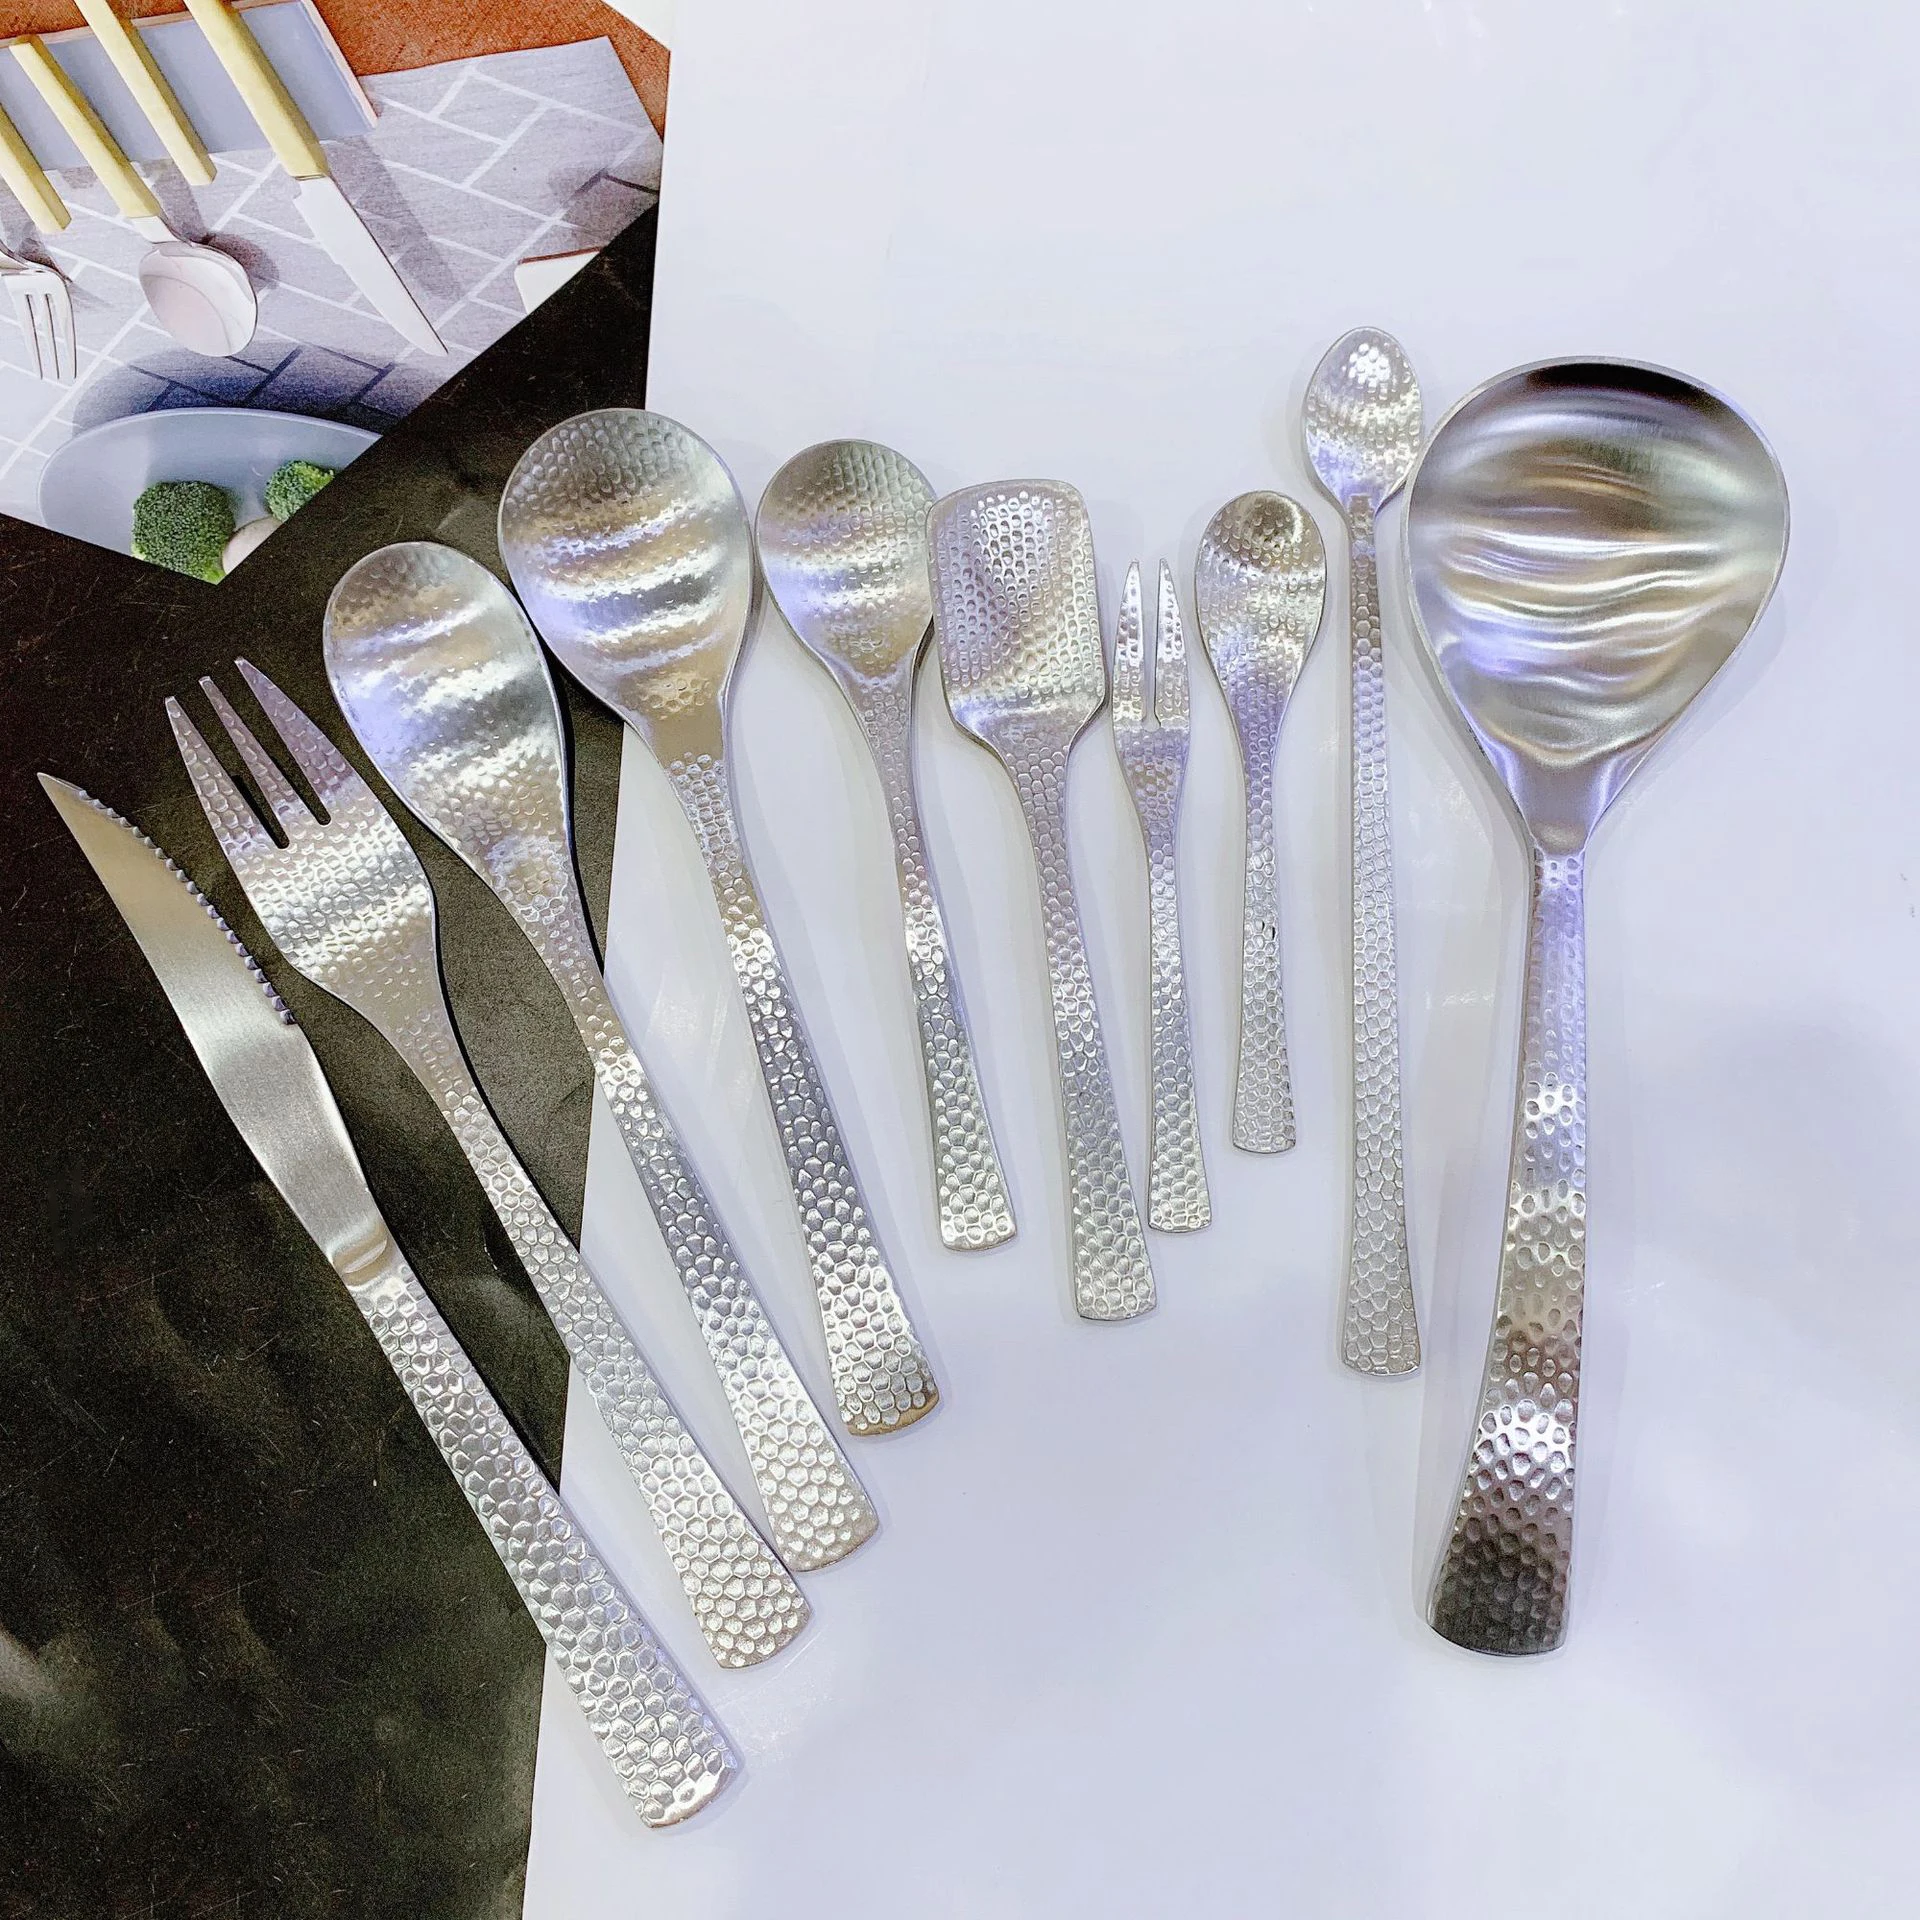 

Full Hammered 18/10 Stainless Steel Silverware Cutlery Set Flatware Service for 4 Tableware Steak Knives Spoons Forks for Home